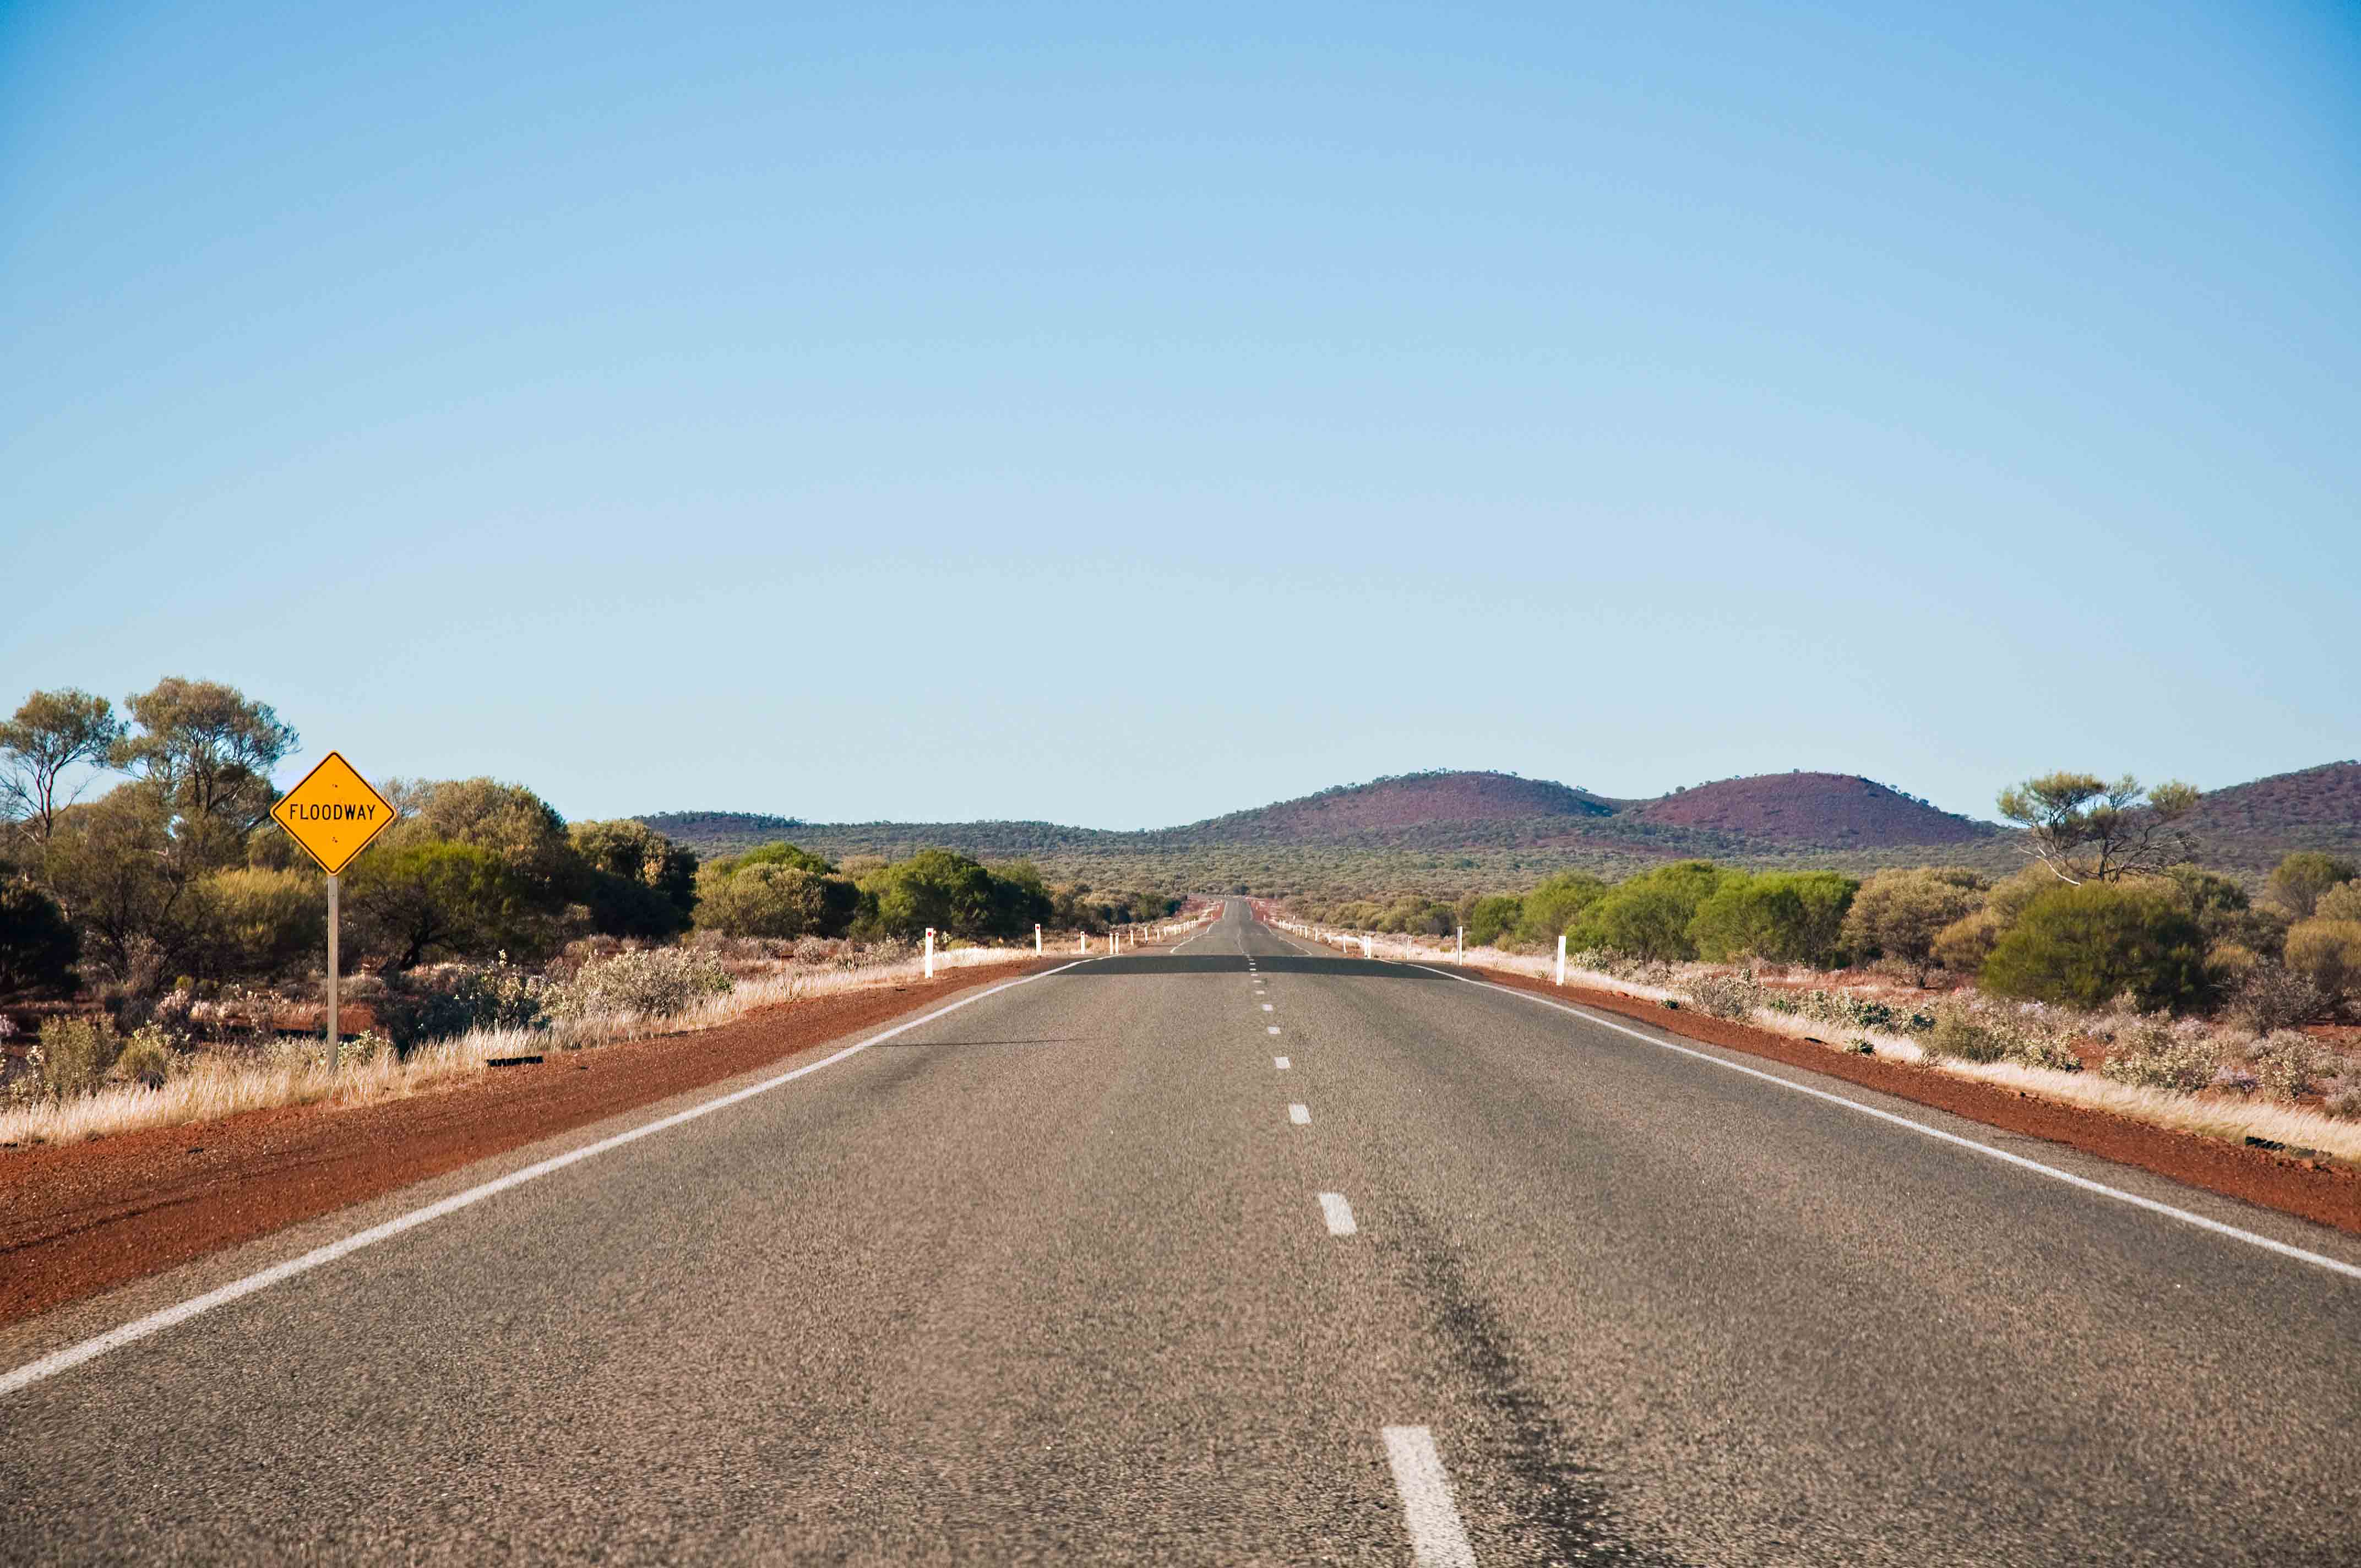 Rural Australian highway disappearing into the distance